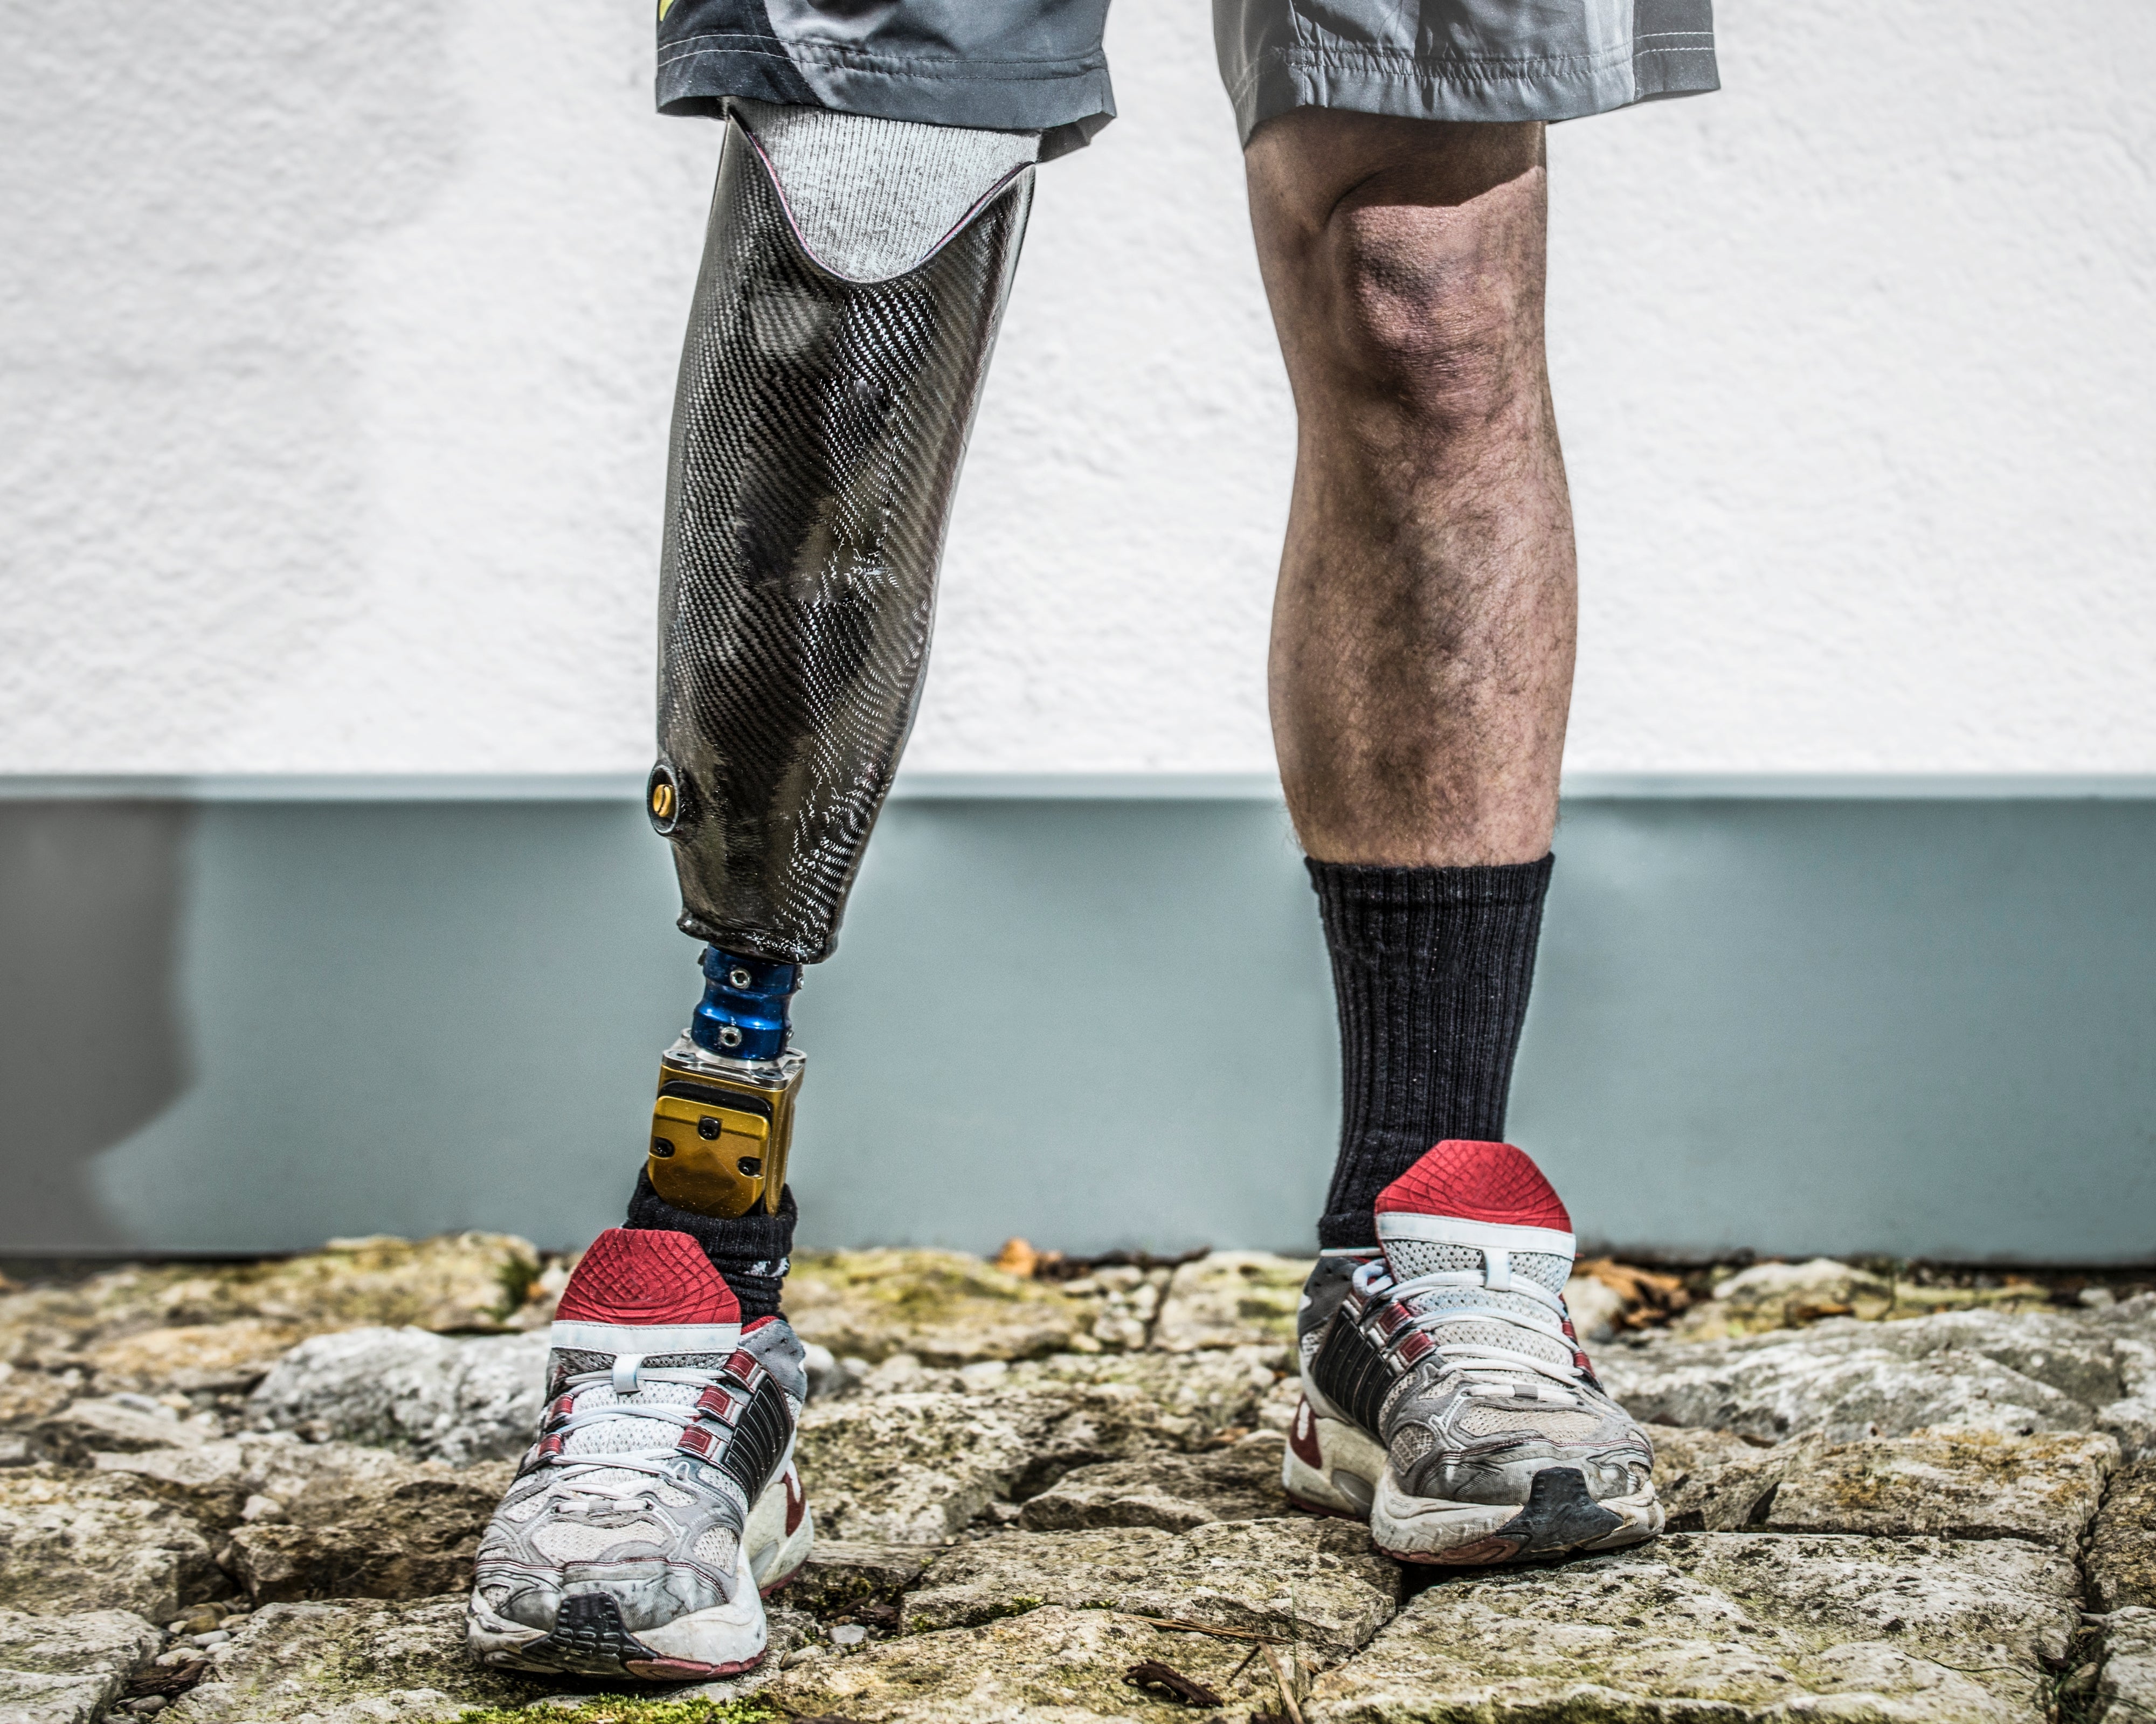 3 Paralympians Describe What It's Like Wearing a Prosthetic Limb